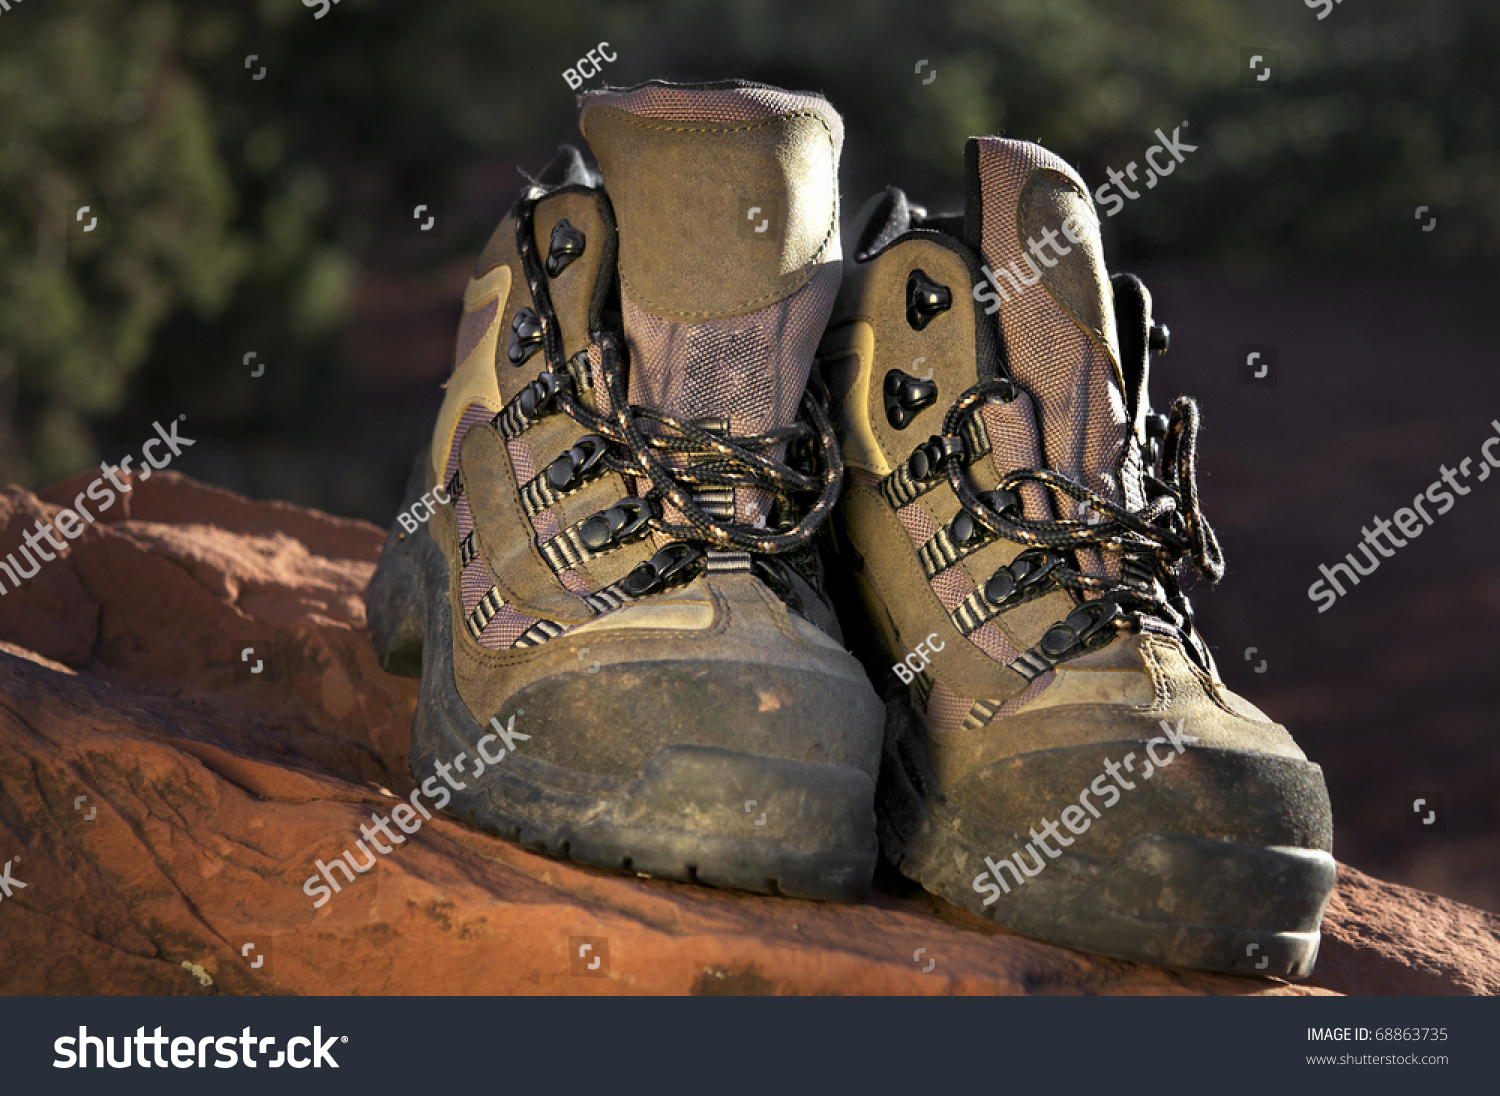 Hiking Boots On Red Rock Stock Photo 